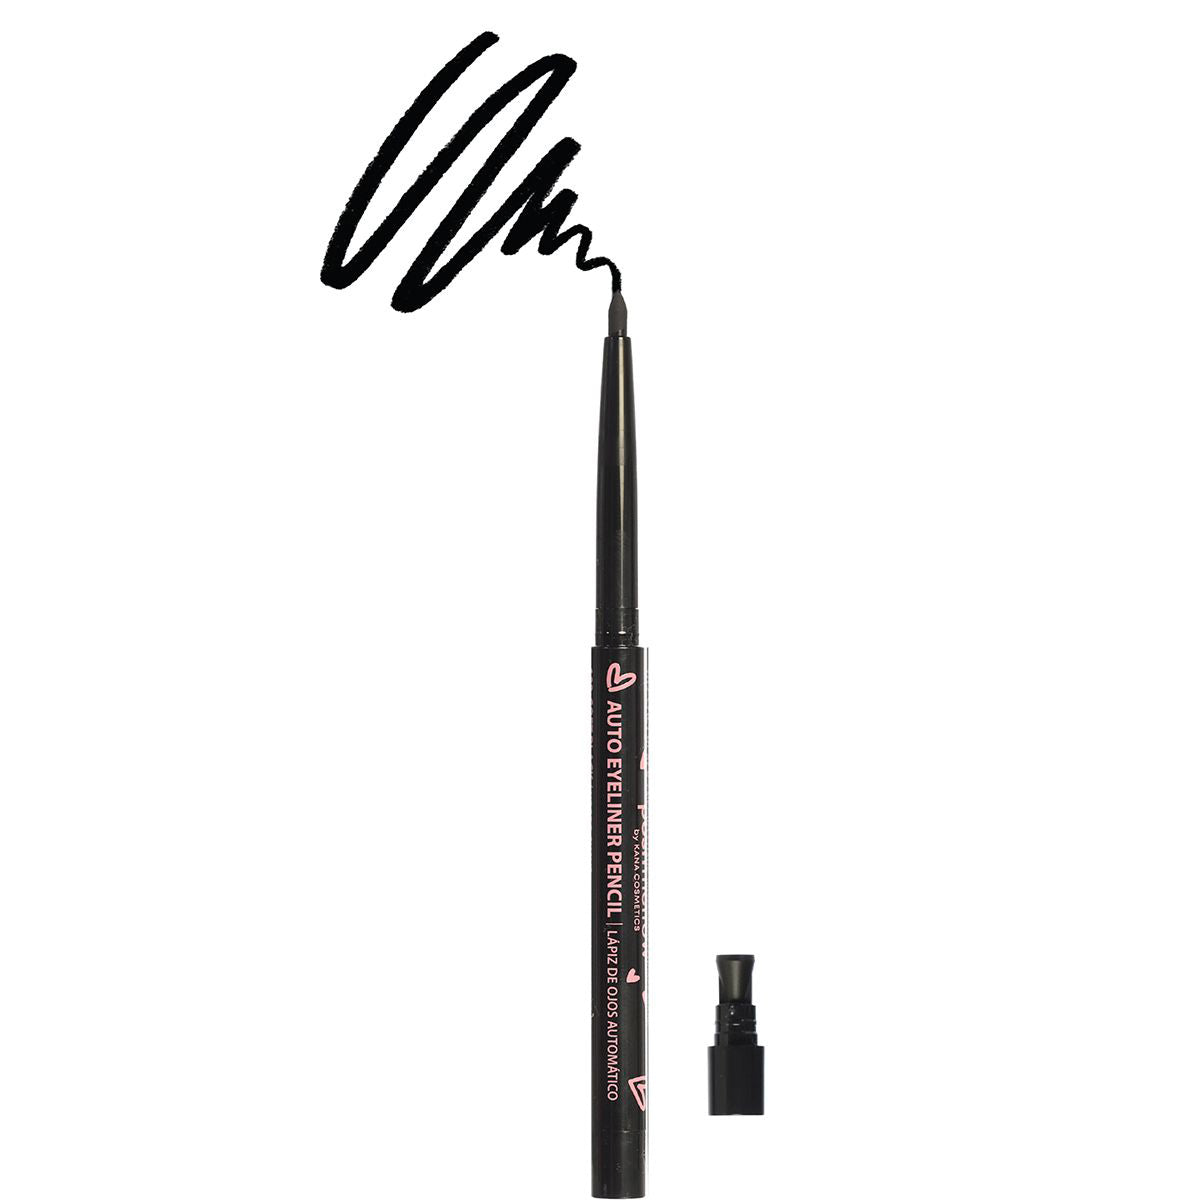 Automatic Eye liner Pencil - Jet Black with Sharpener by Poshmellow